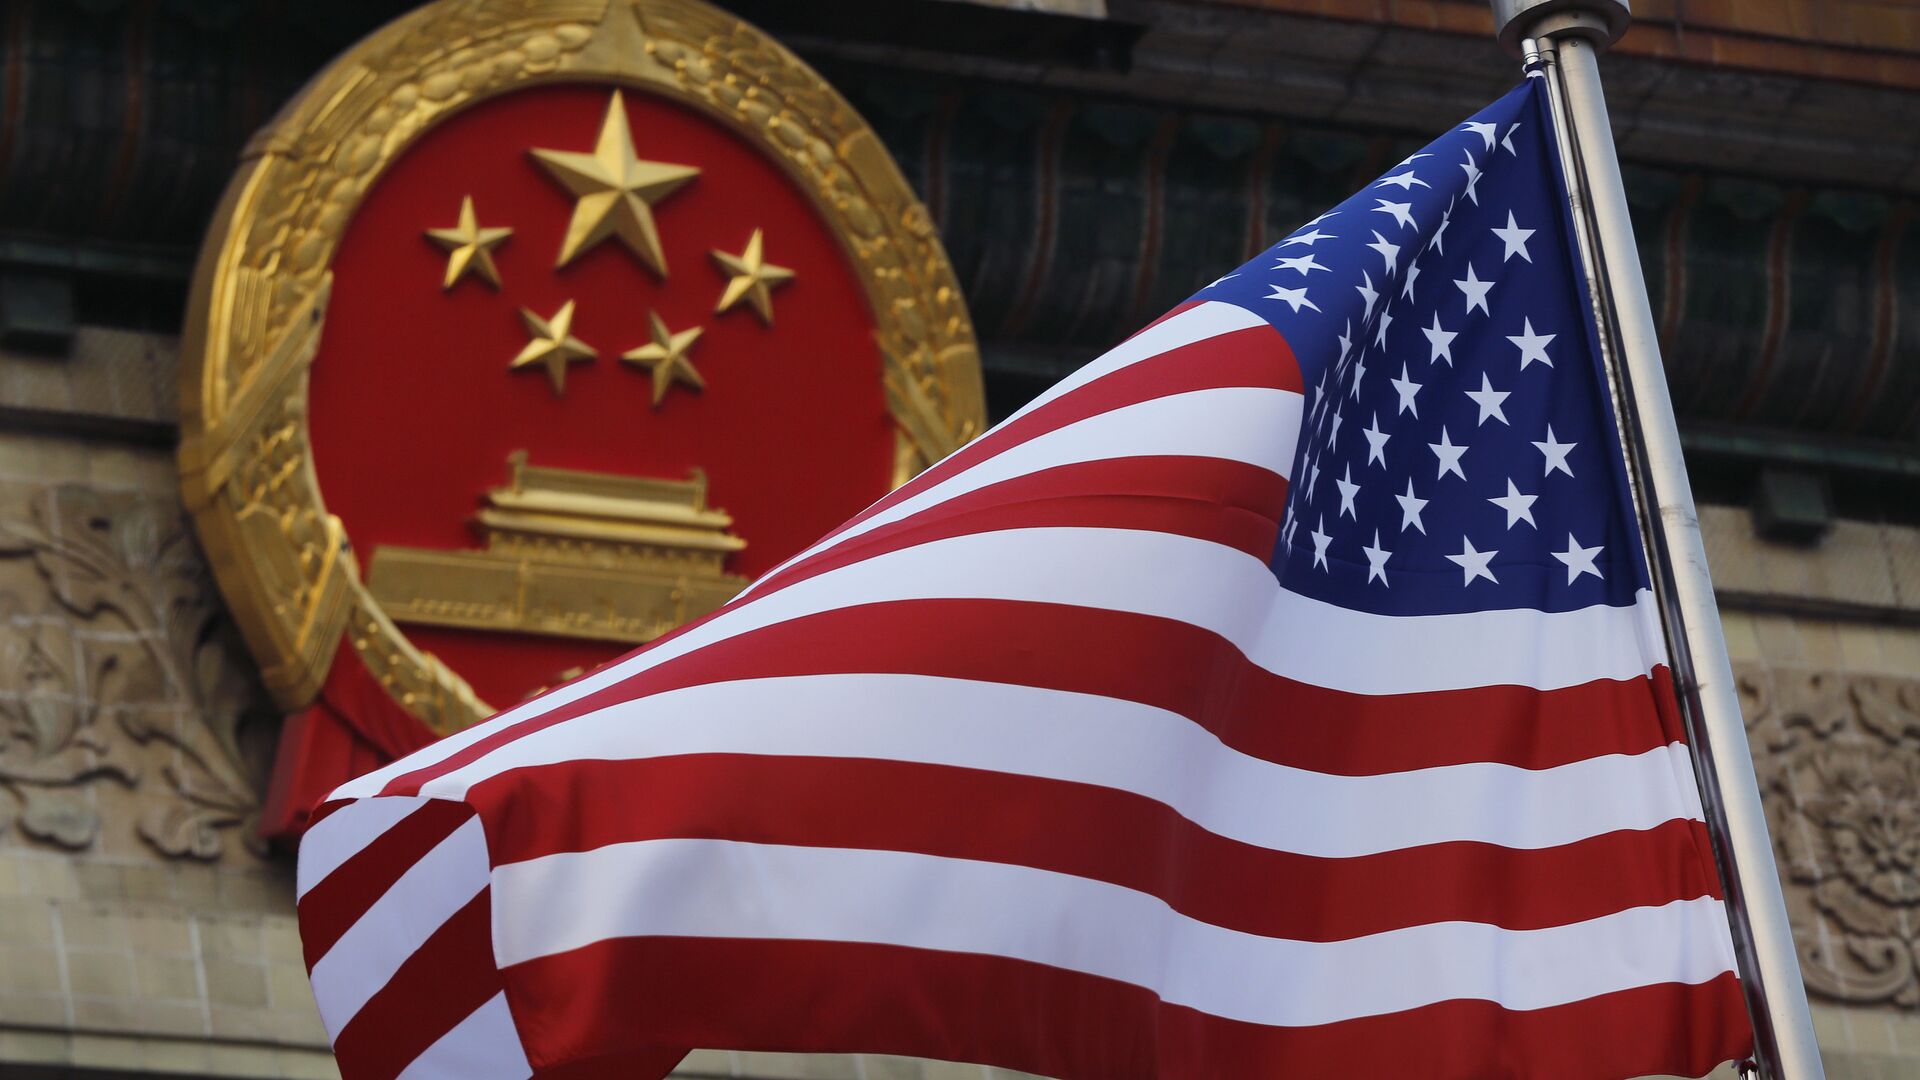 FILE - In this Nov. 9, 2017 file photo, an American flag is flown next to the Chinese national emblem during a welcome ceremony for visiting U.S. President Donald Trump outside the Great Hall of the People in Beijing - Sputnik International, 1920, 31.05.2022